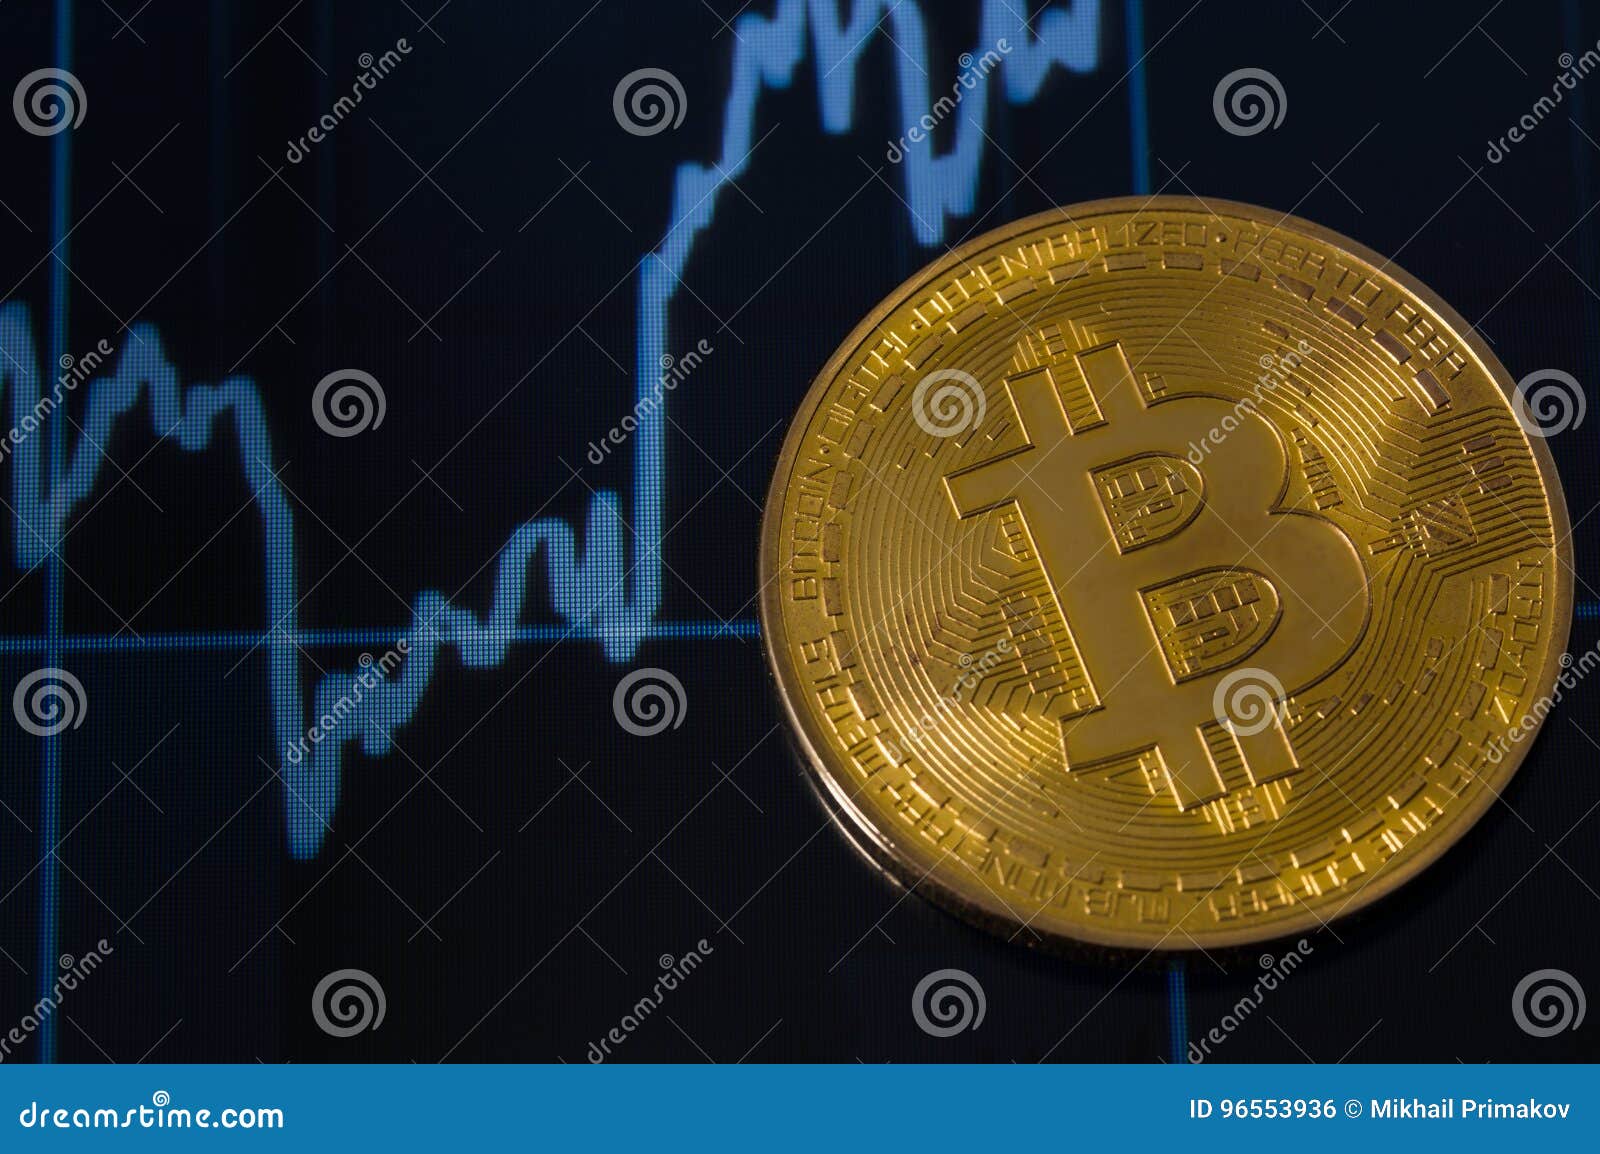 what is the stock symbol for bitcoin